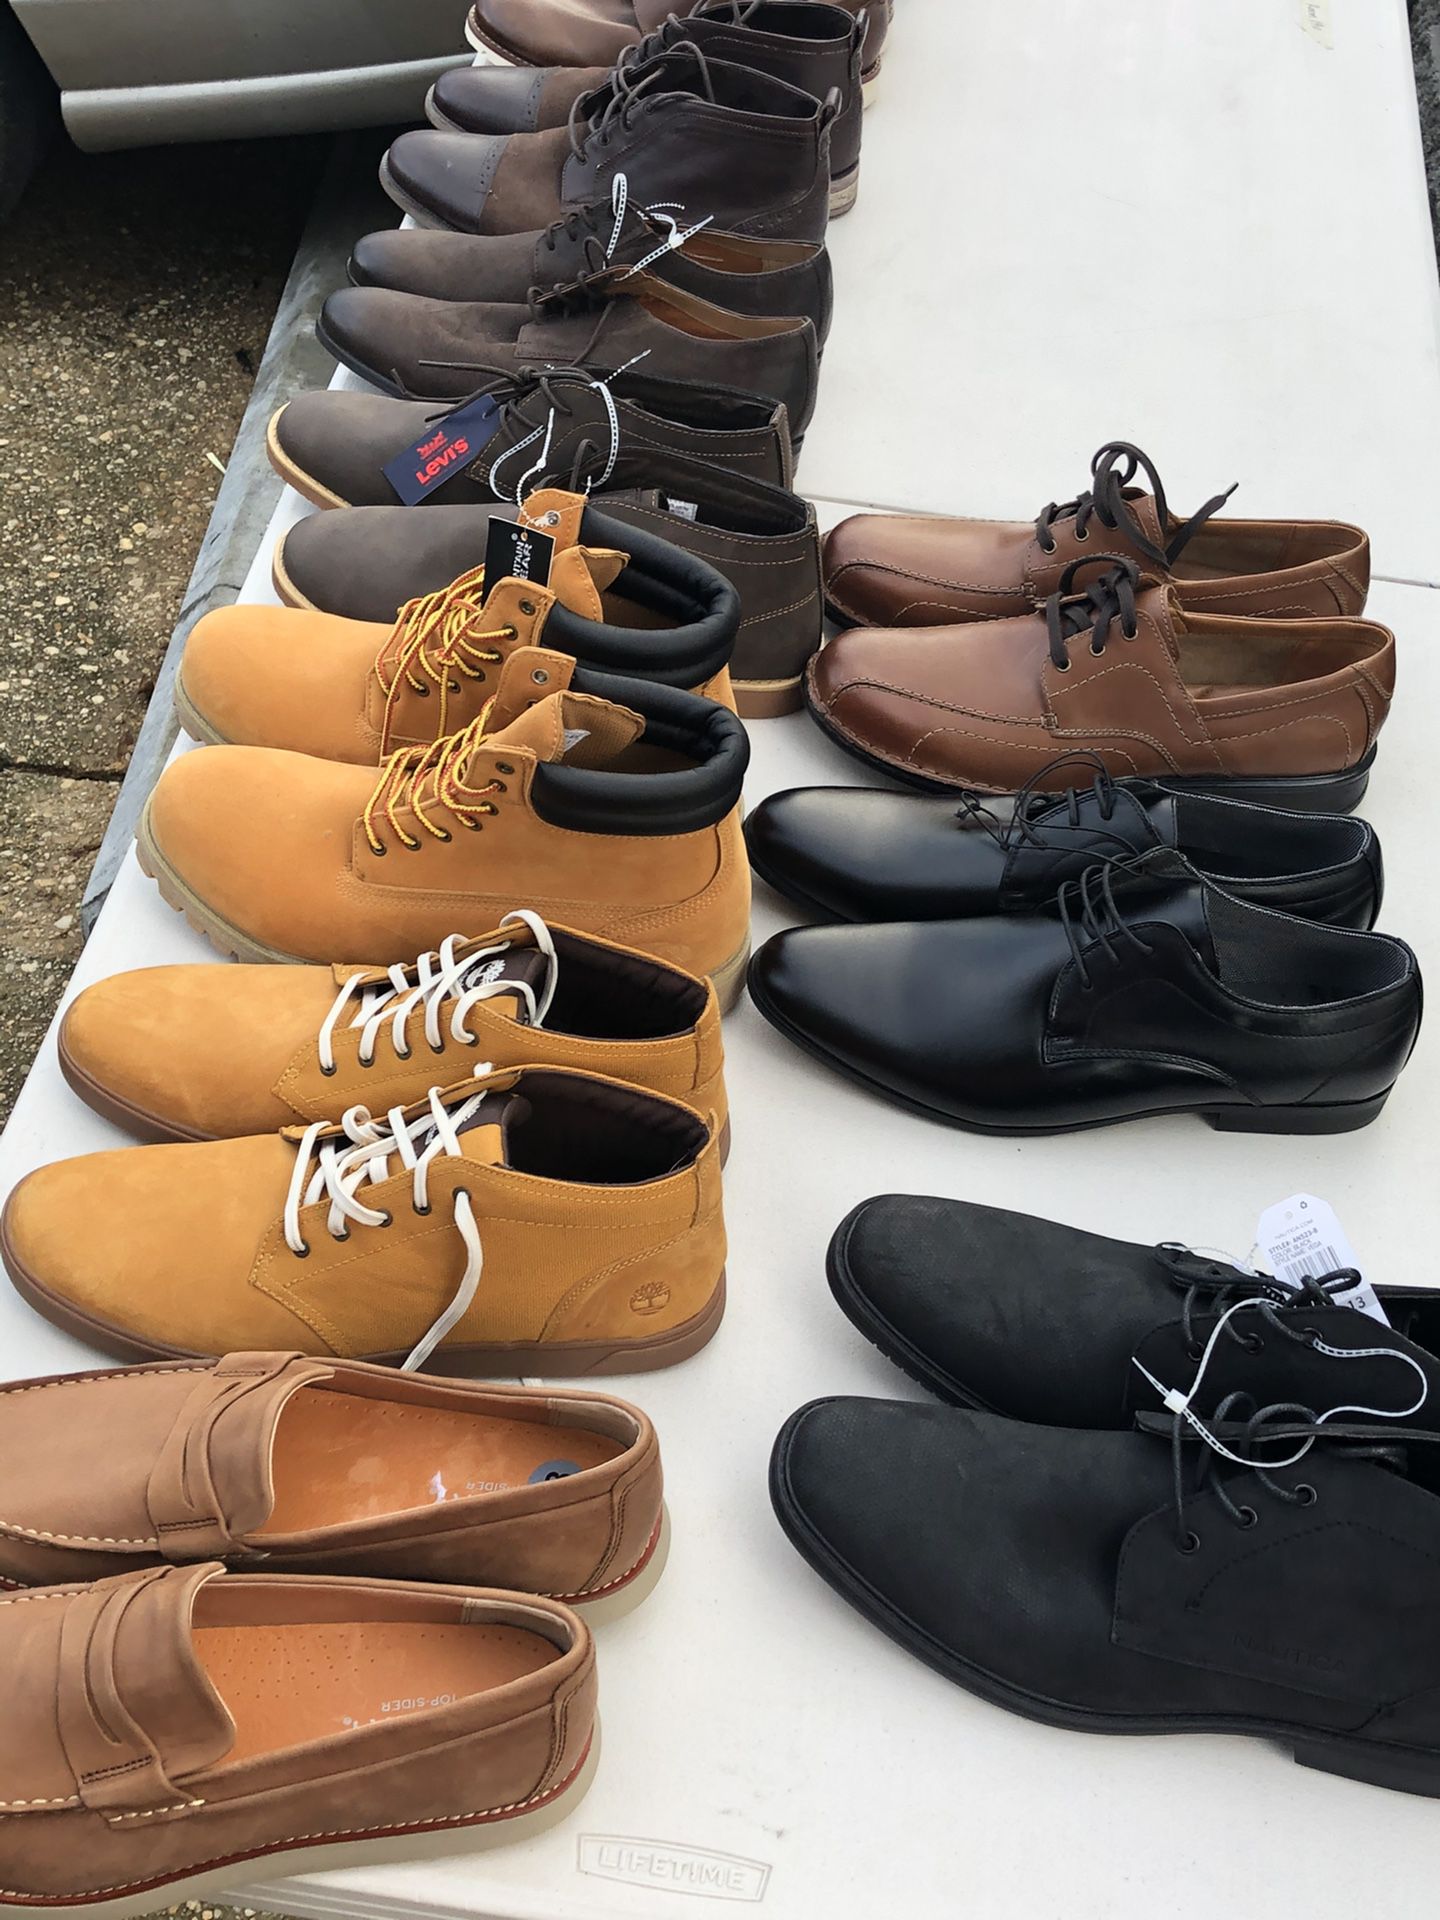 Dress shoes & boots (Perry Ellis, Timberland, Steve Maden) size 12 & 13 new and slightly used